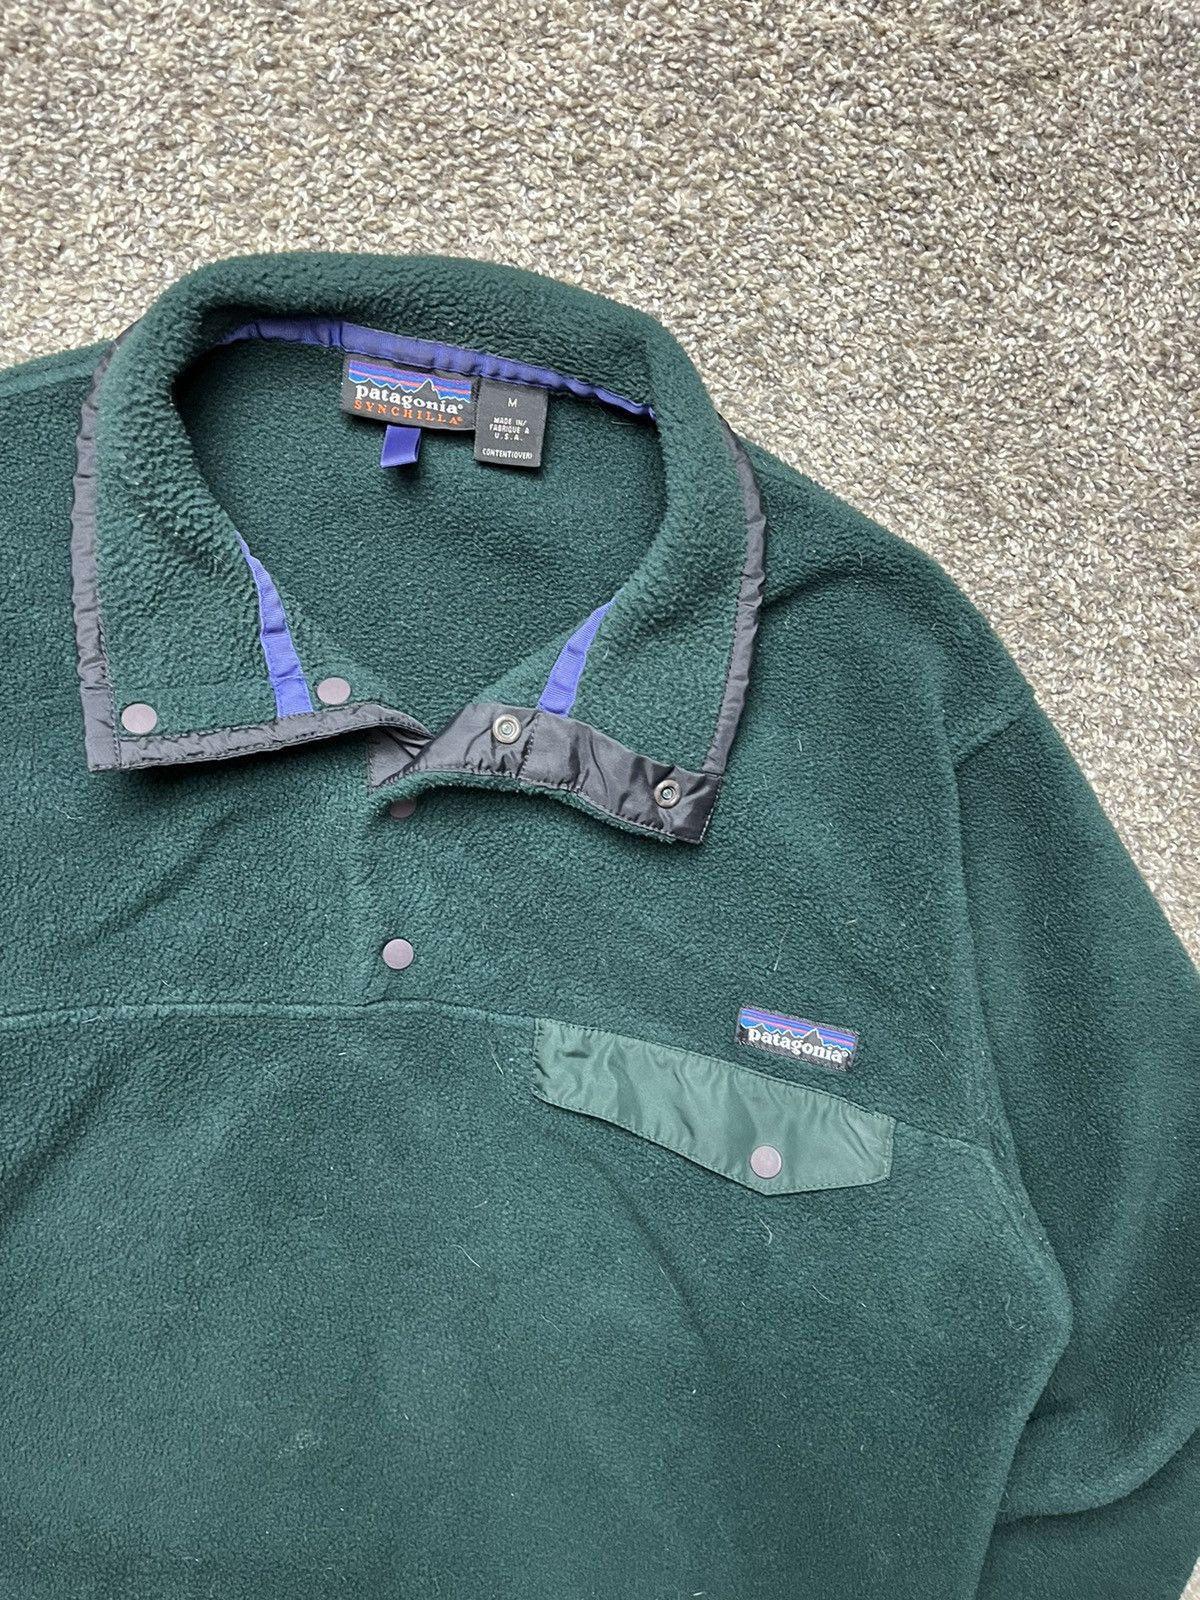 Vintage Vintage 90s USA Made Patagonia Green Synchilla Fleece Med Size US M / EU 48-50 / 2 - 2 Preview